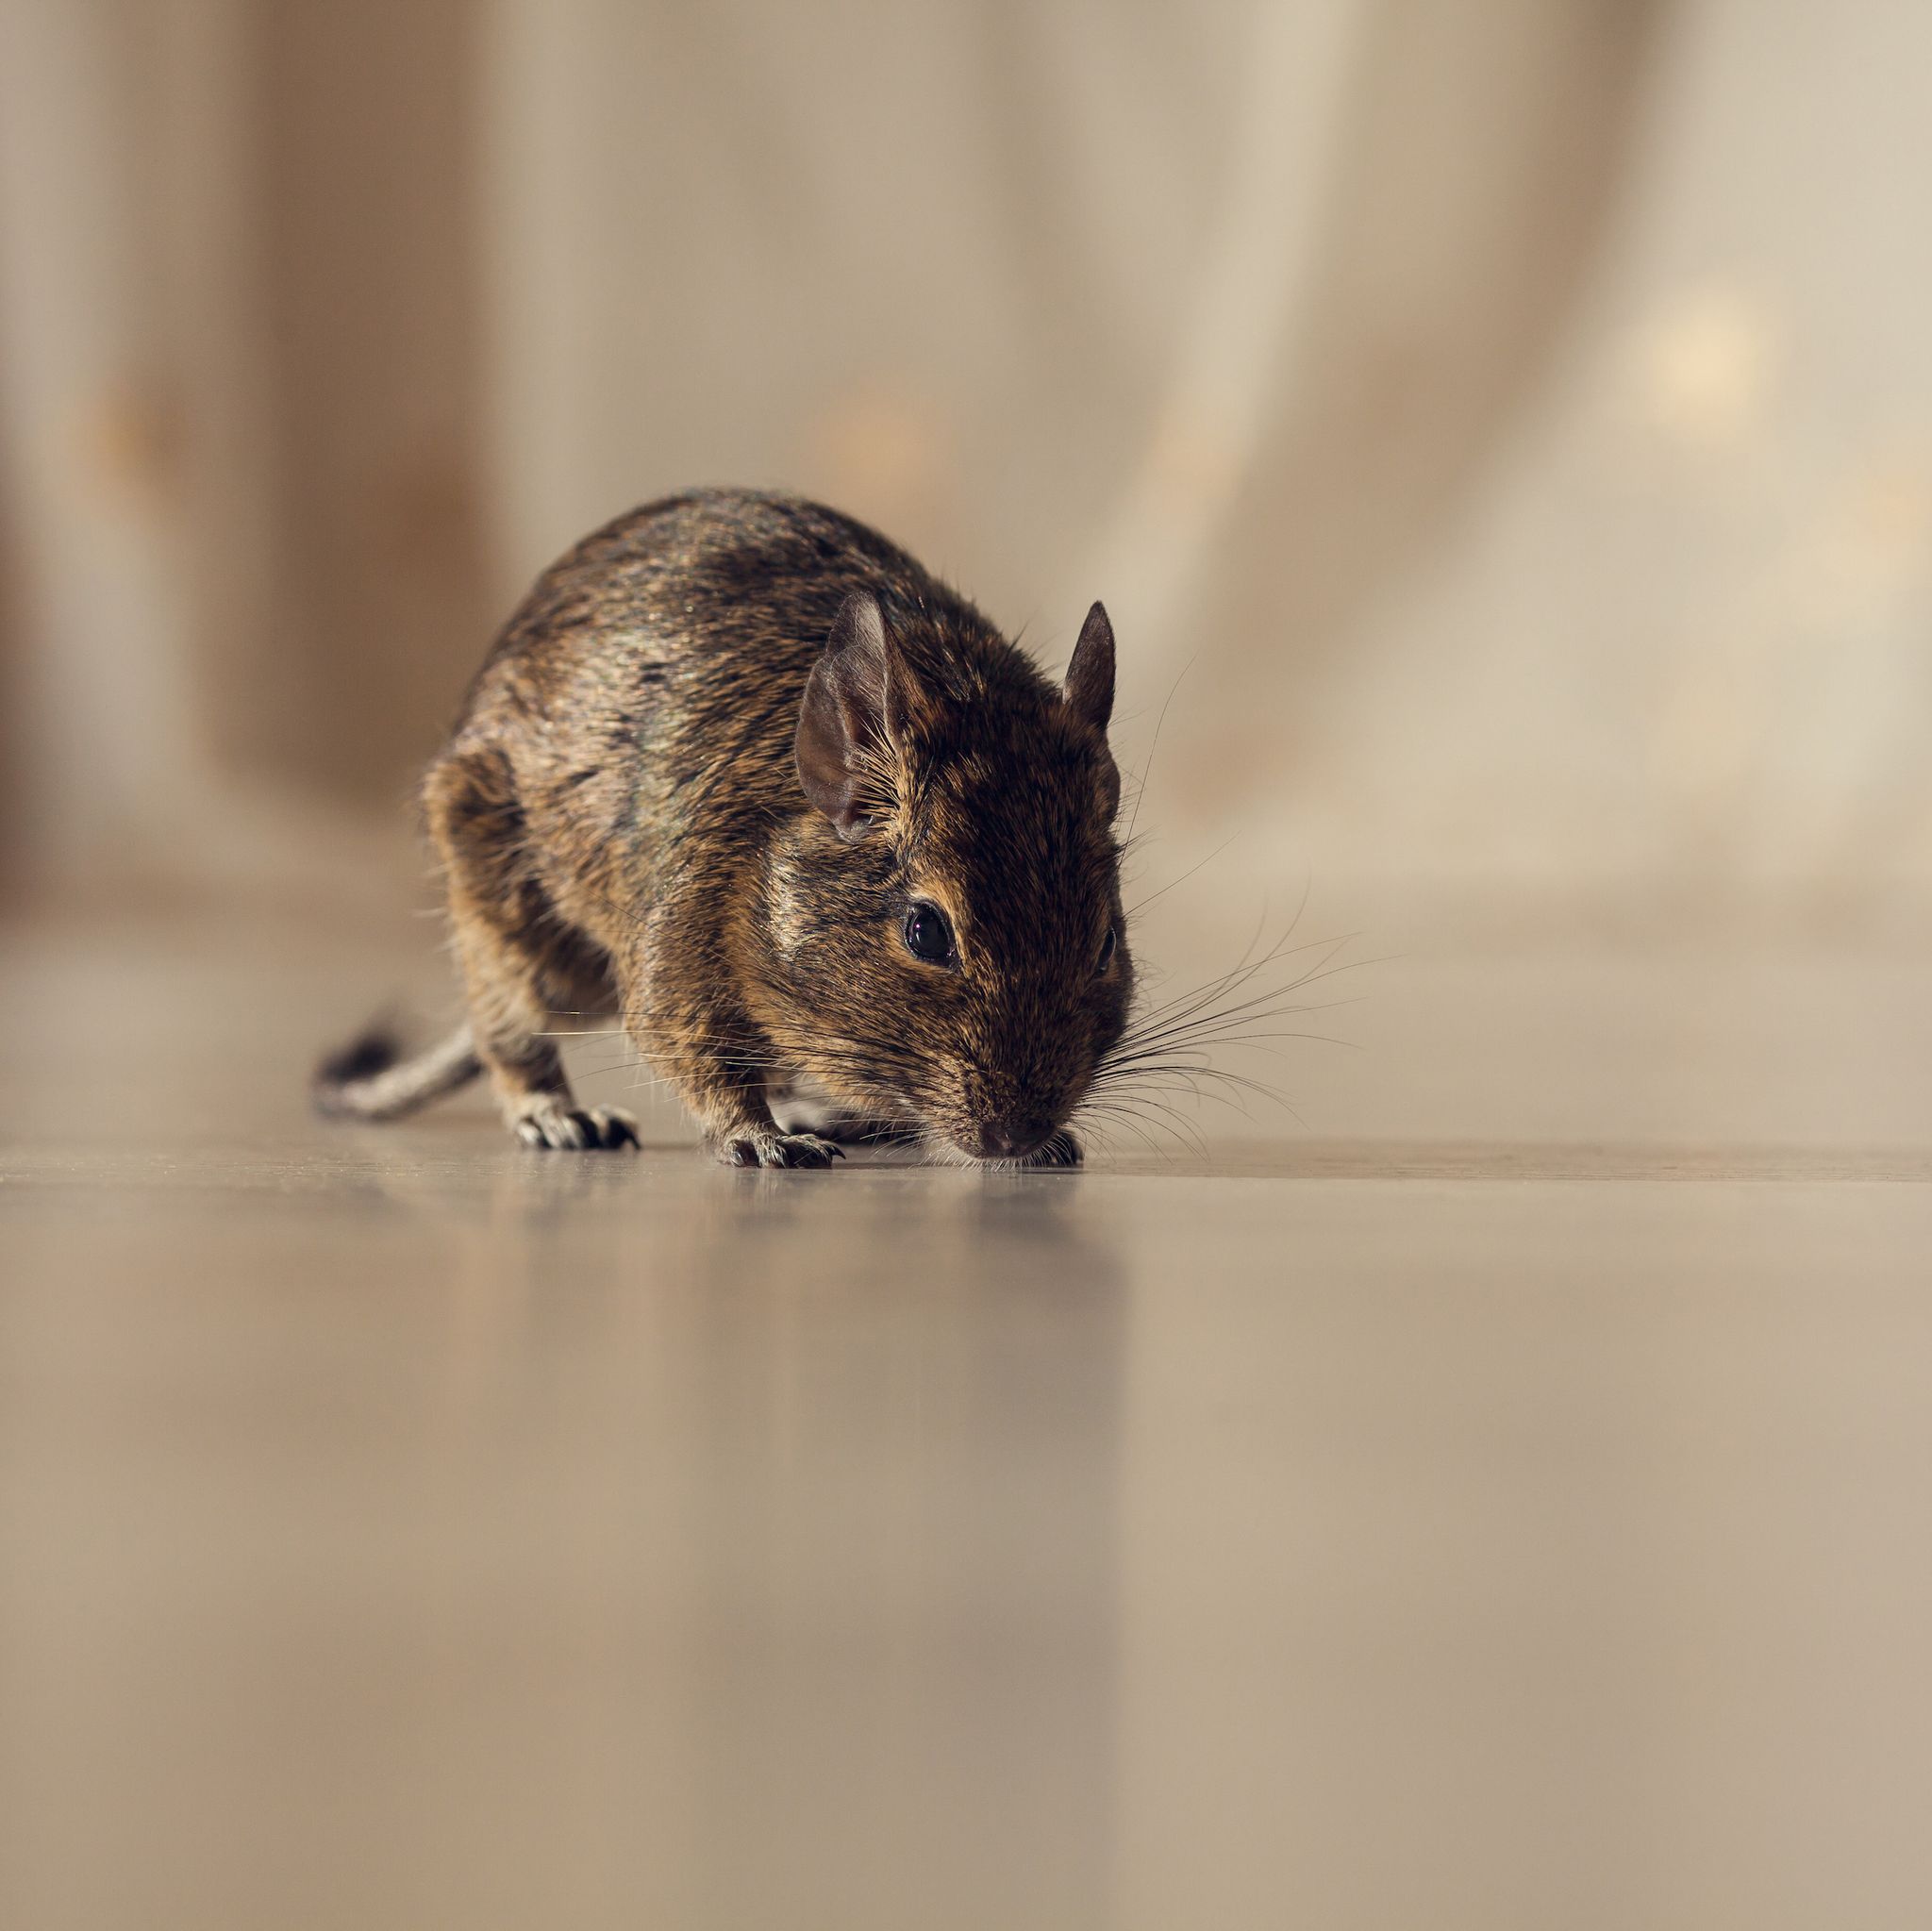 How to Get Rid of Mice For Good - 5 Best Ways to Get Rid of Mice